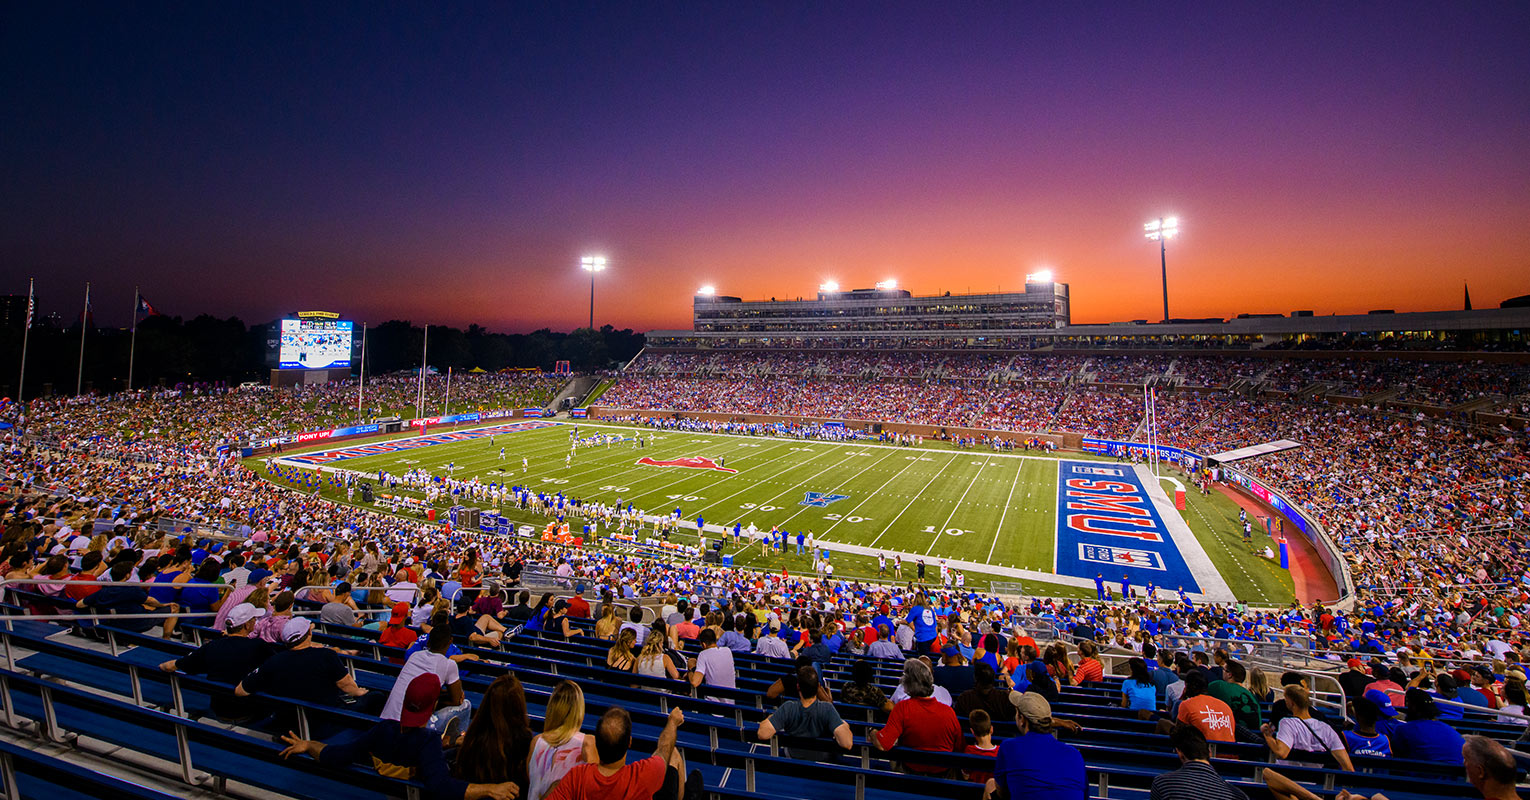 Night time shot of a large crowd attending an SMU Mustang's football game.